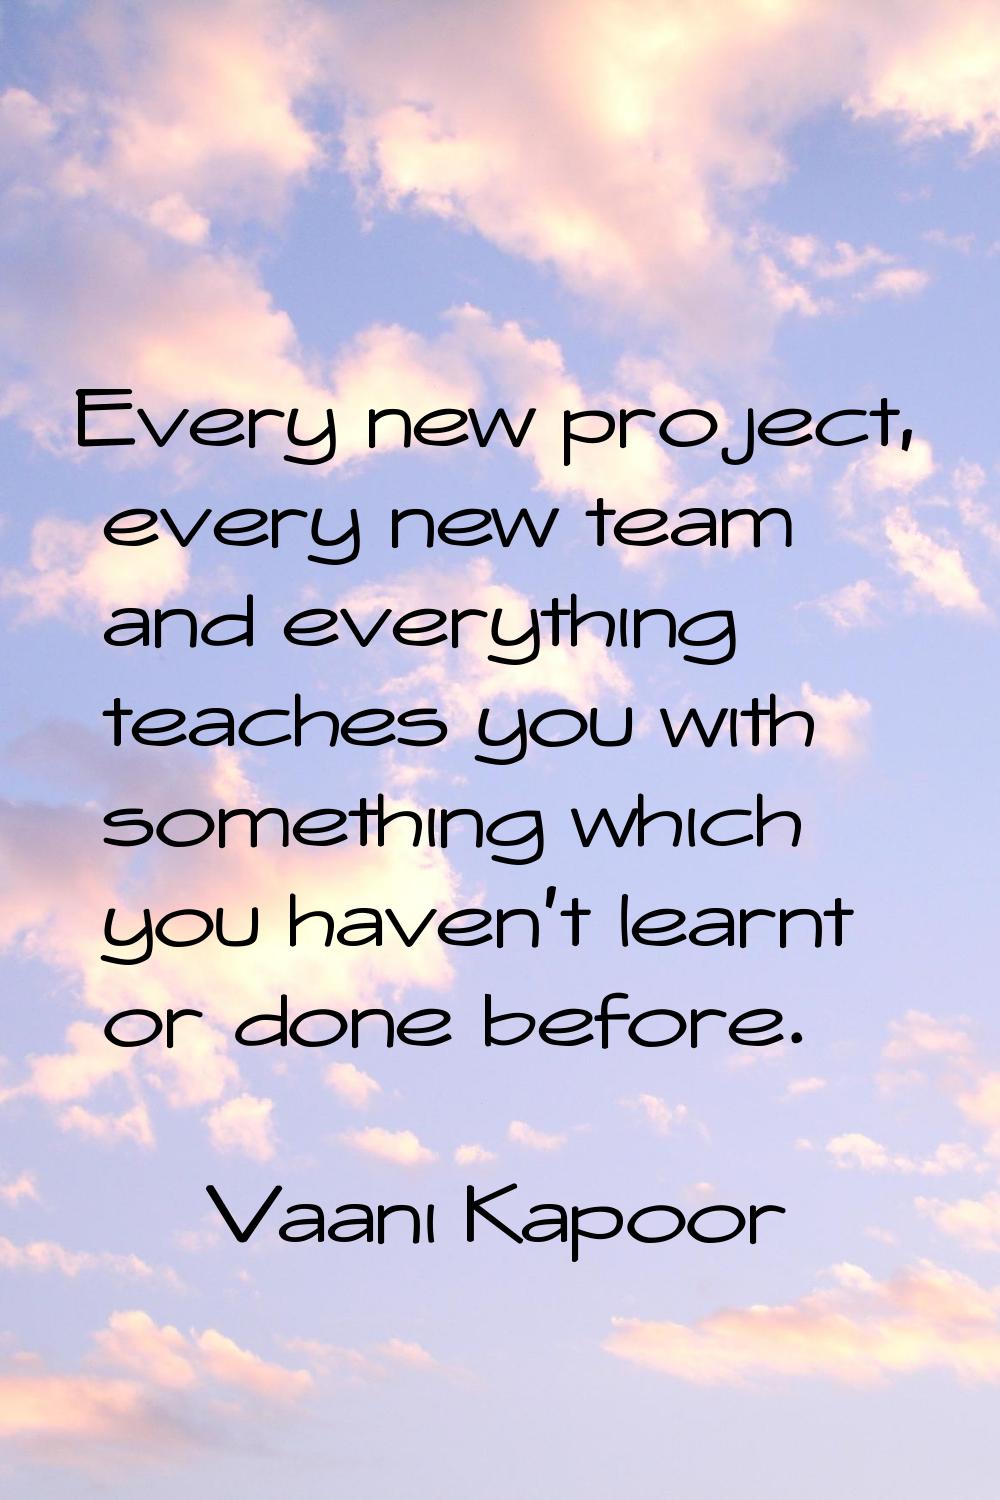 Every new project, every new team and everything teaches you with something which you haven't learn